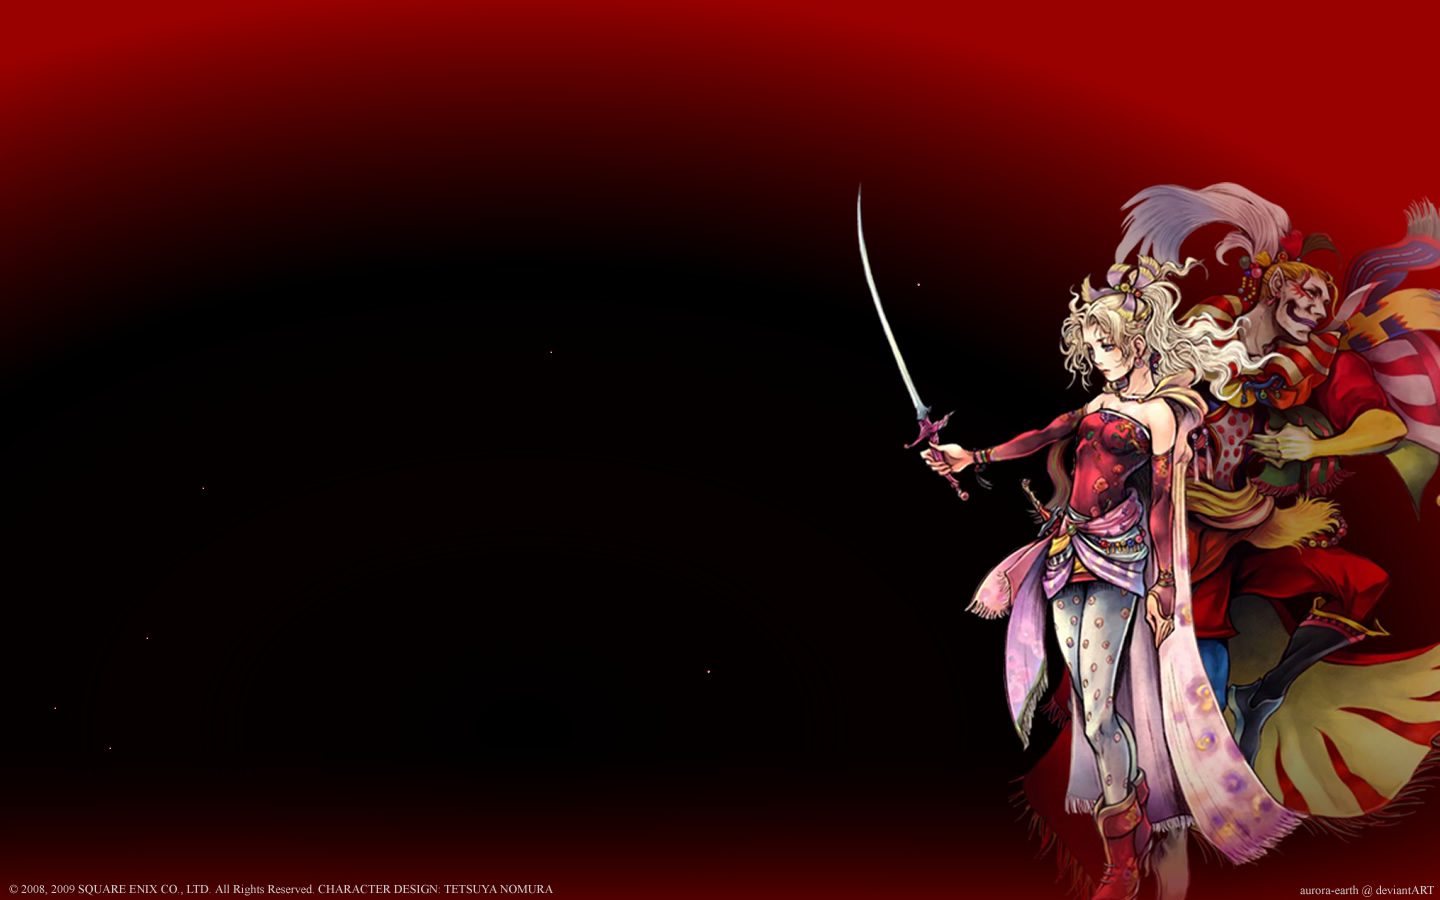 Free Download Dissidia Ff6 By Aurora Earth Fan Art Wallpaper Games 09 14 Aurora 1440x900 For Your Desktop Mobile Tablet Explore 48 Ff6 Wallpaper Final Fantasy 6 Wallpapers